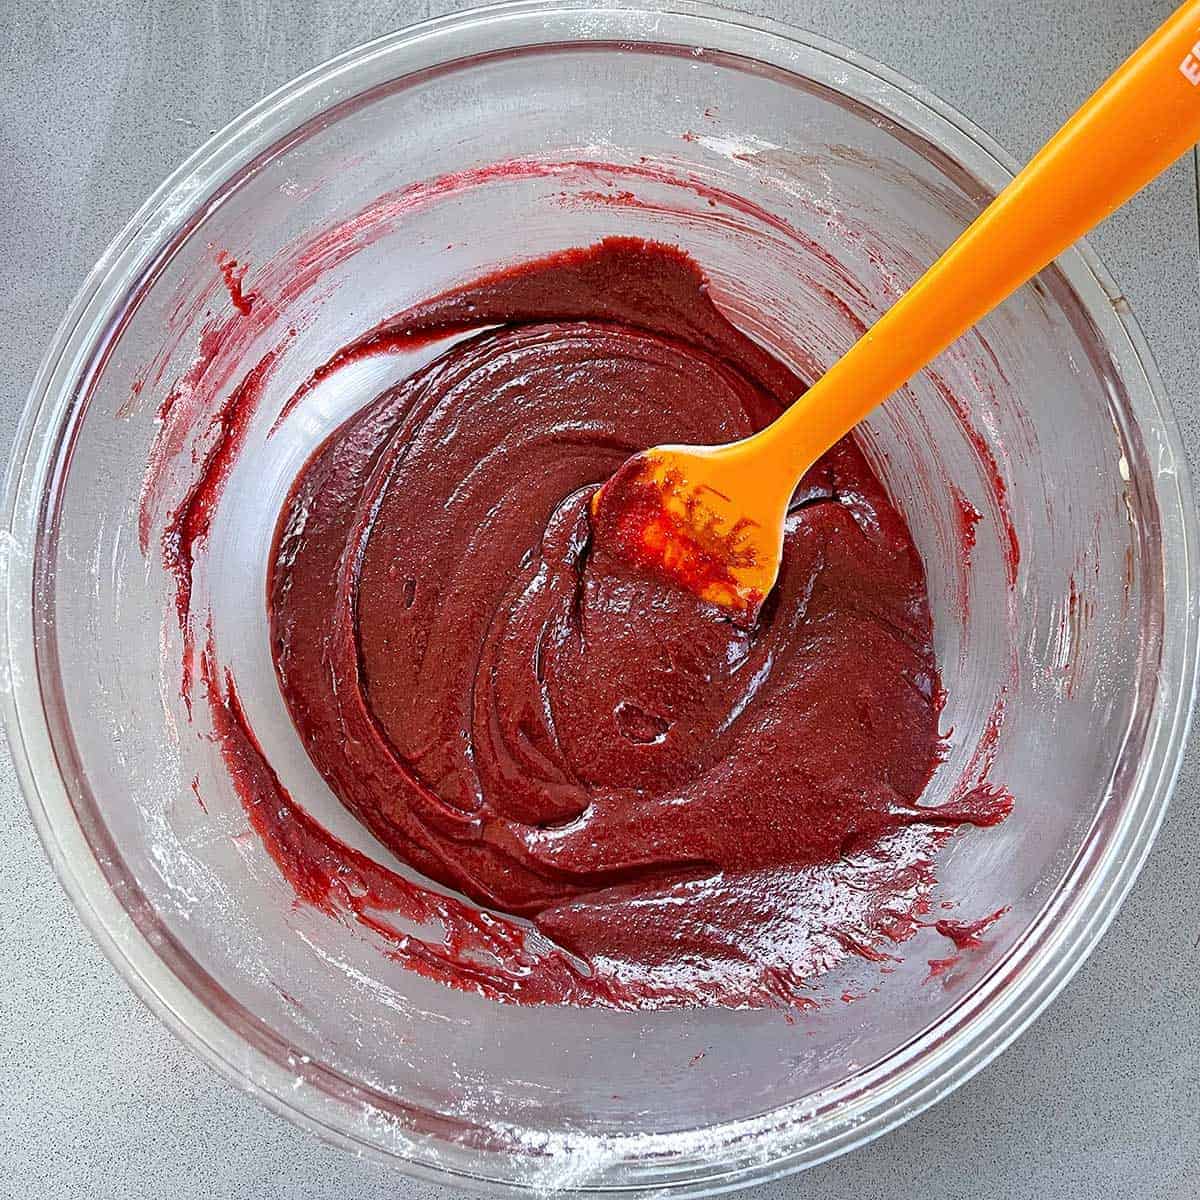 The ingredients for Red Velvet Brownie in a glass bowl.